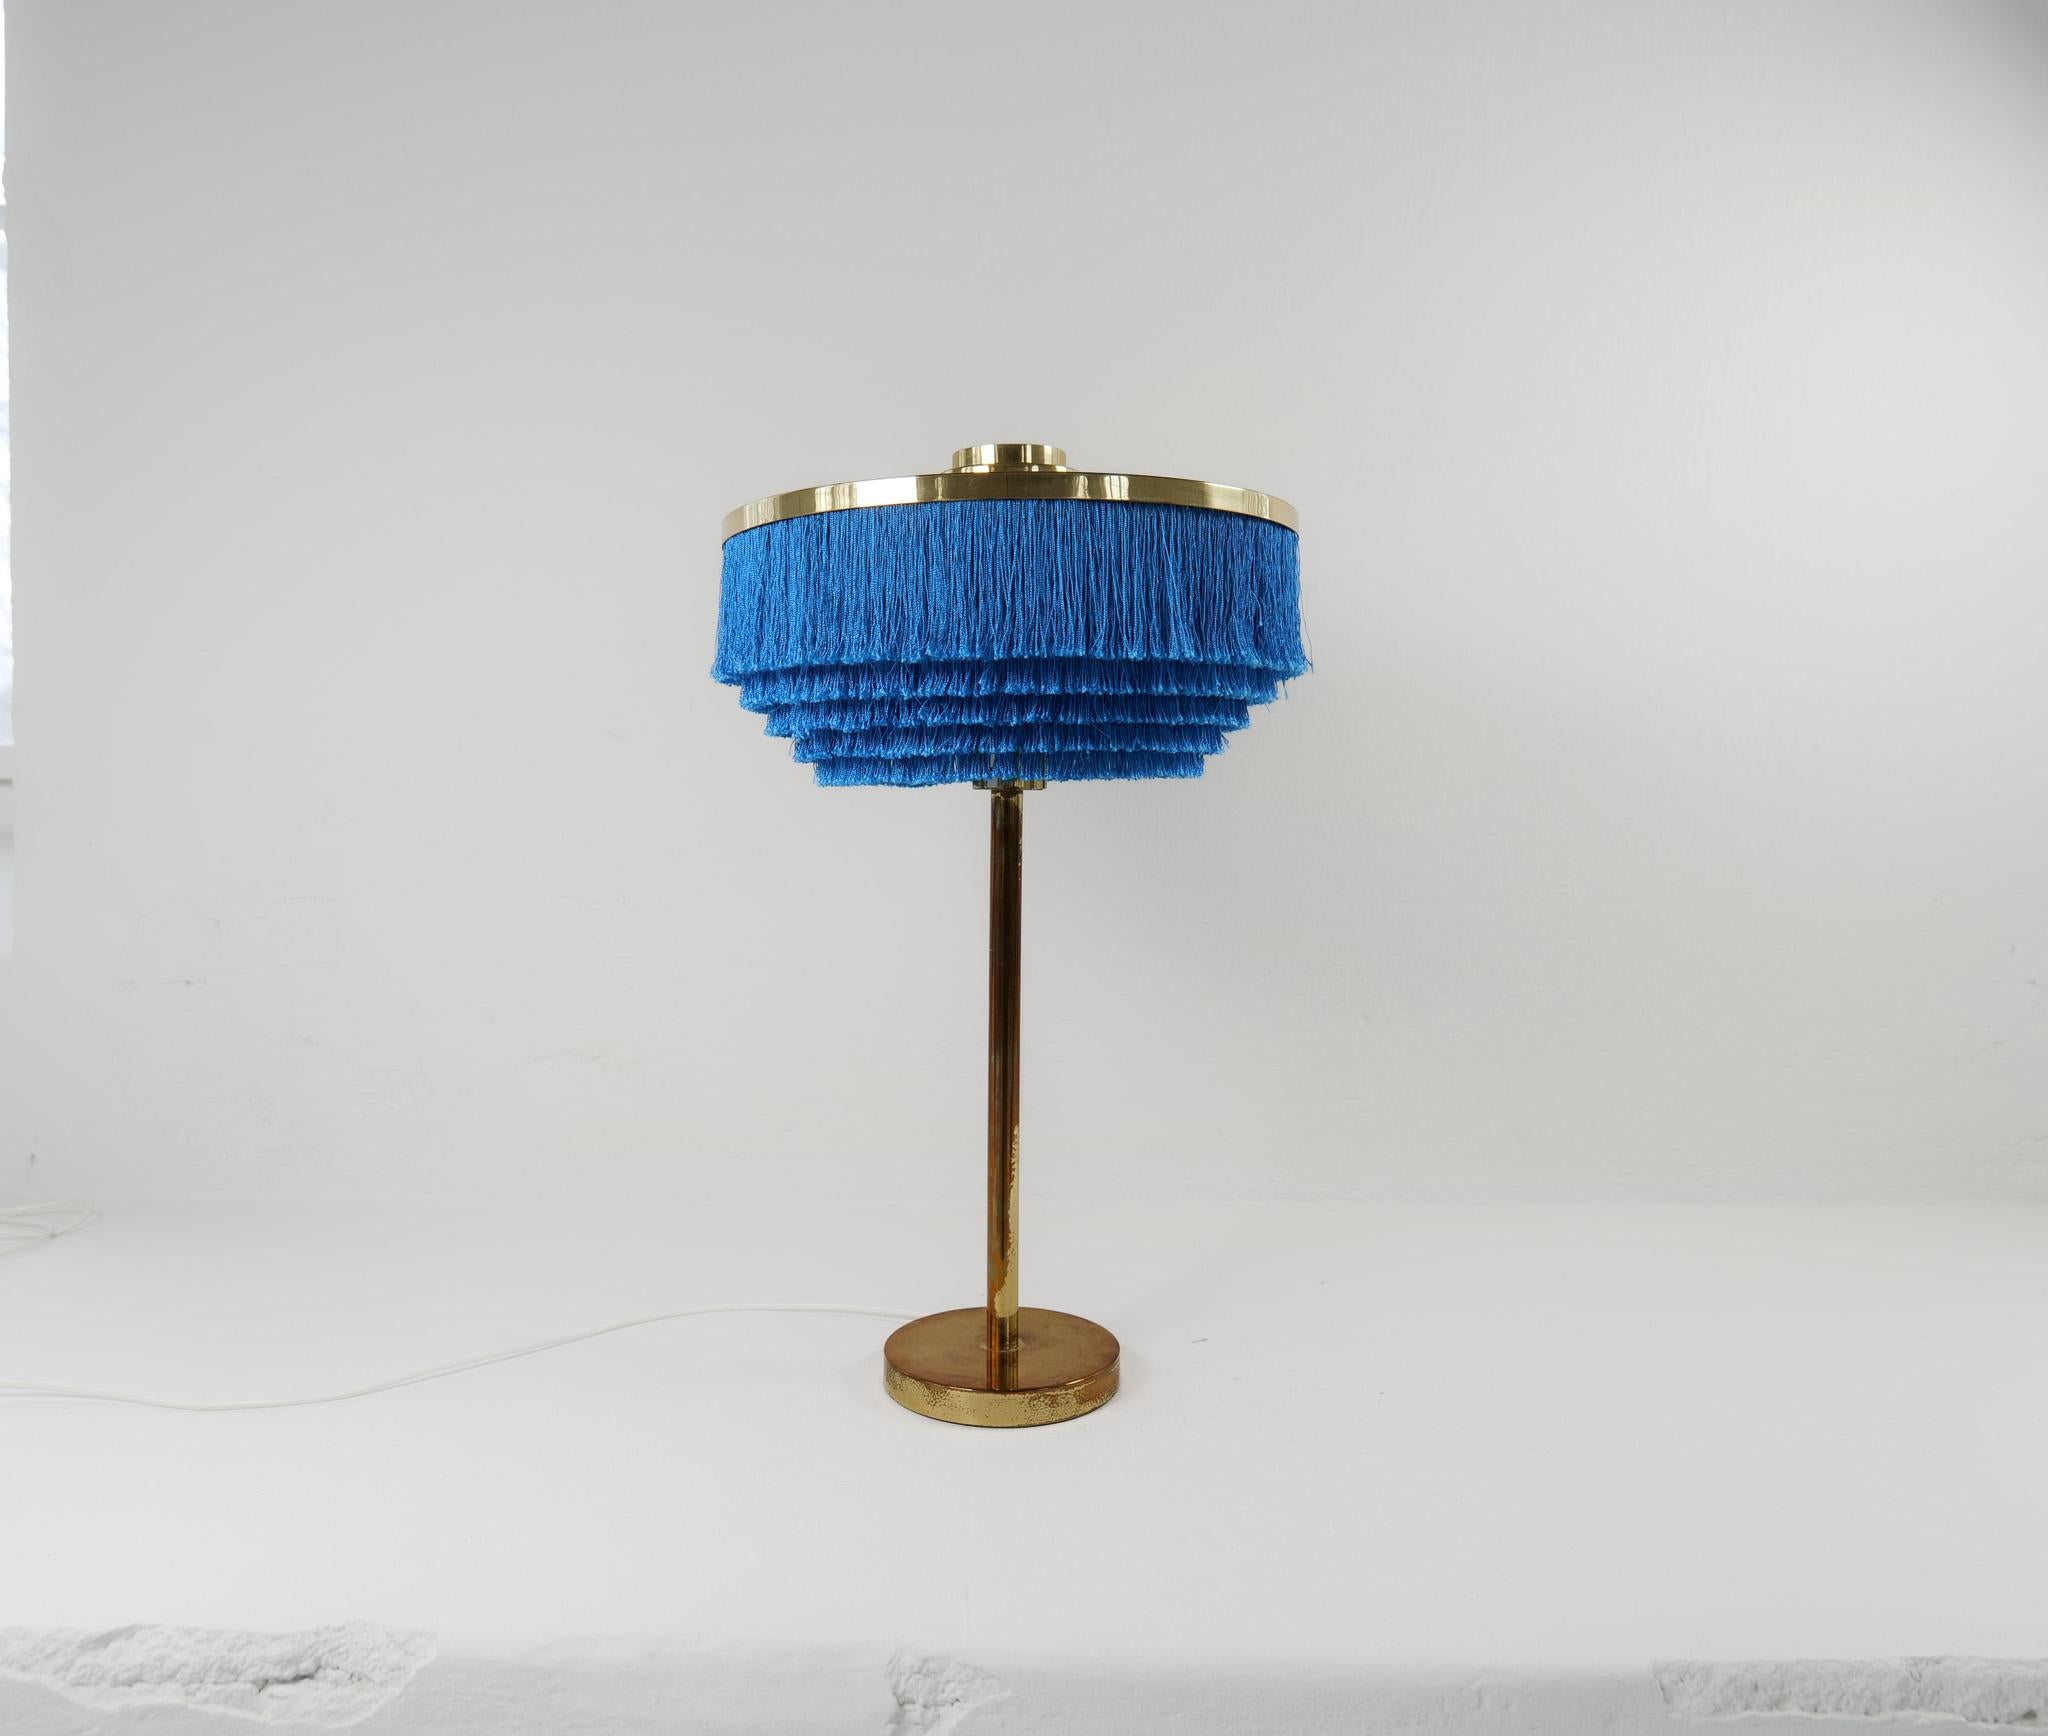 Rare table lamp model B-138 designed by Hans-Agne Jakobsson. Produced by Hans-Agne Jakobsson in Markaryd, Sweden.
This lamp is one of the rarest and most sought-after models in Hans-Agne’s fringe series.

Good vintage condition. The fringes are in